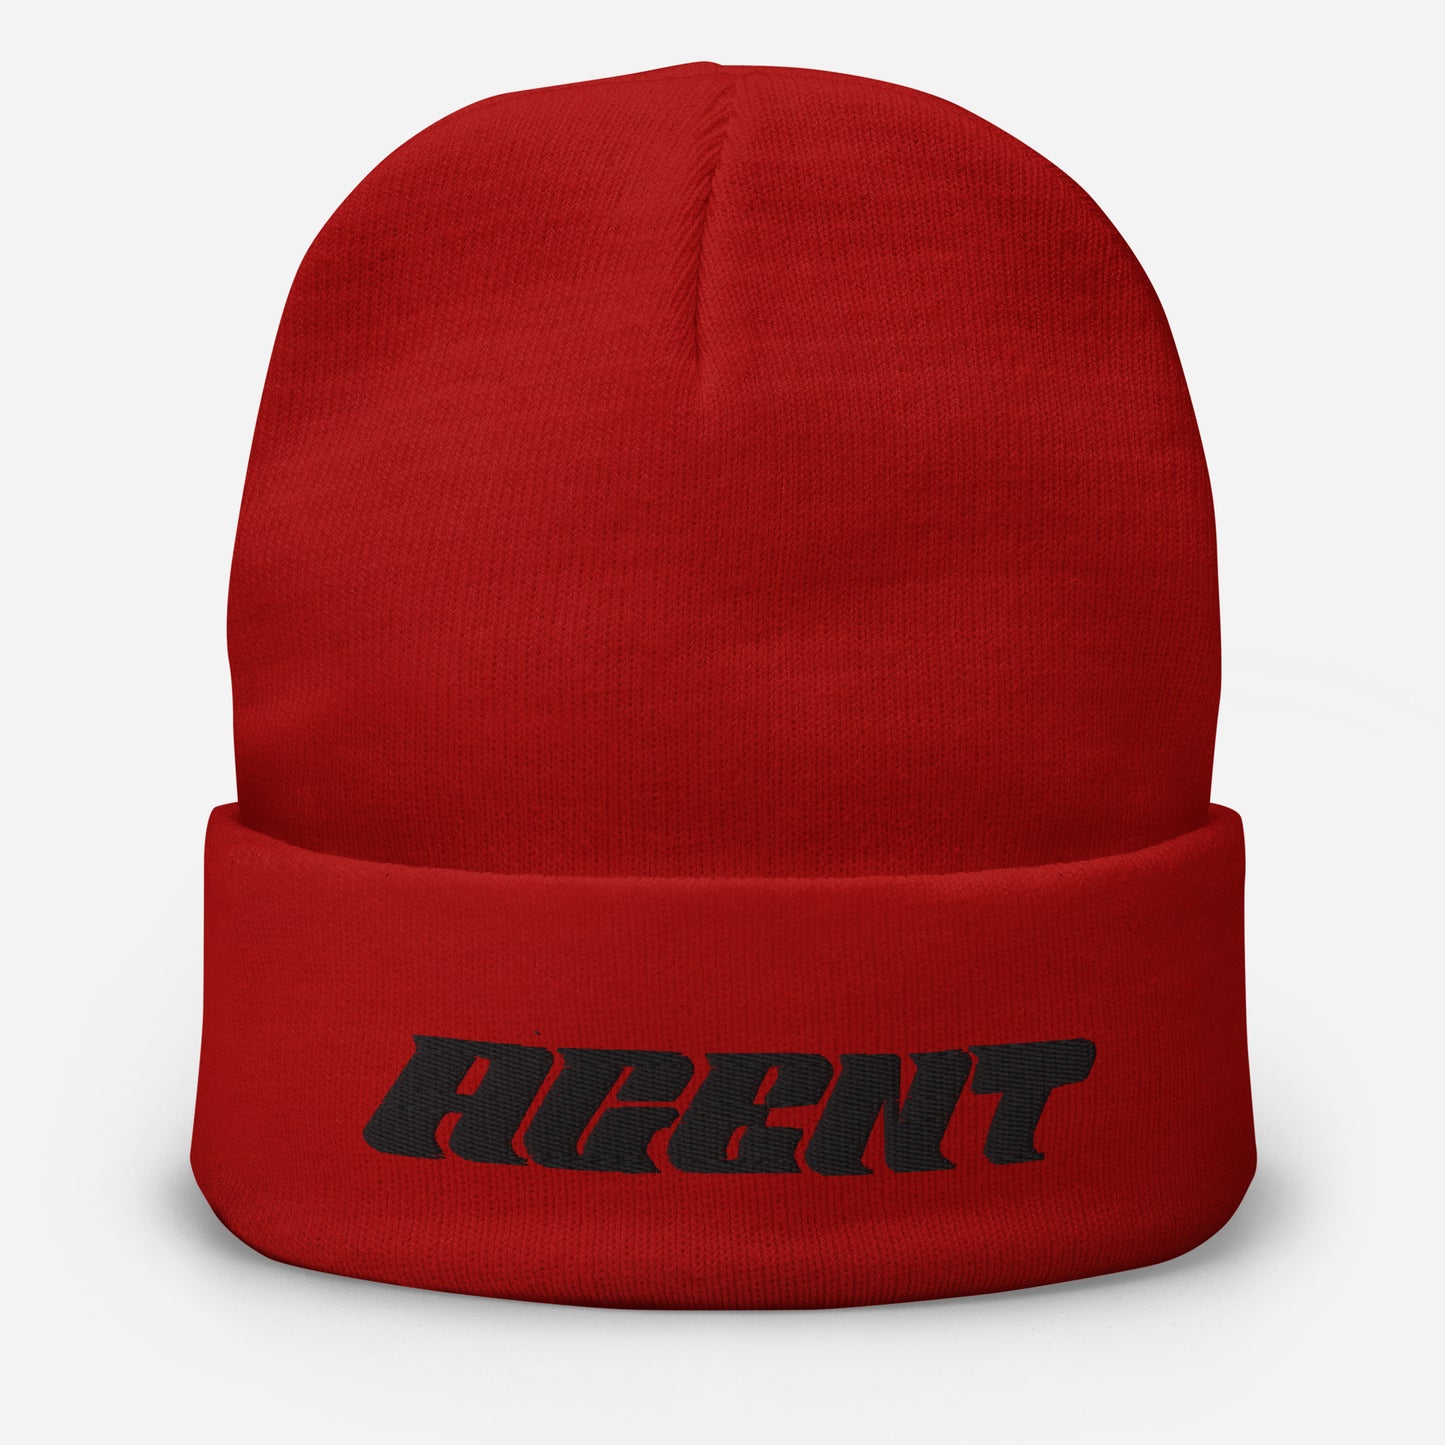 Agent Letters Beanie Black Thread